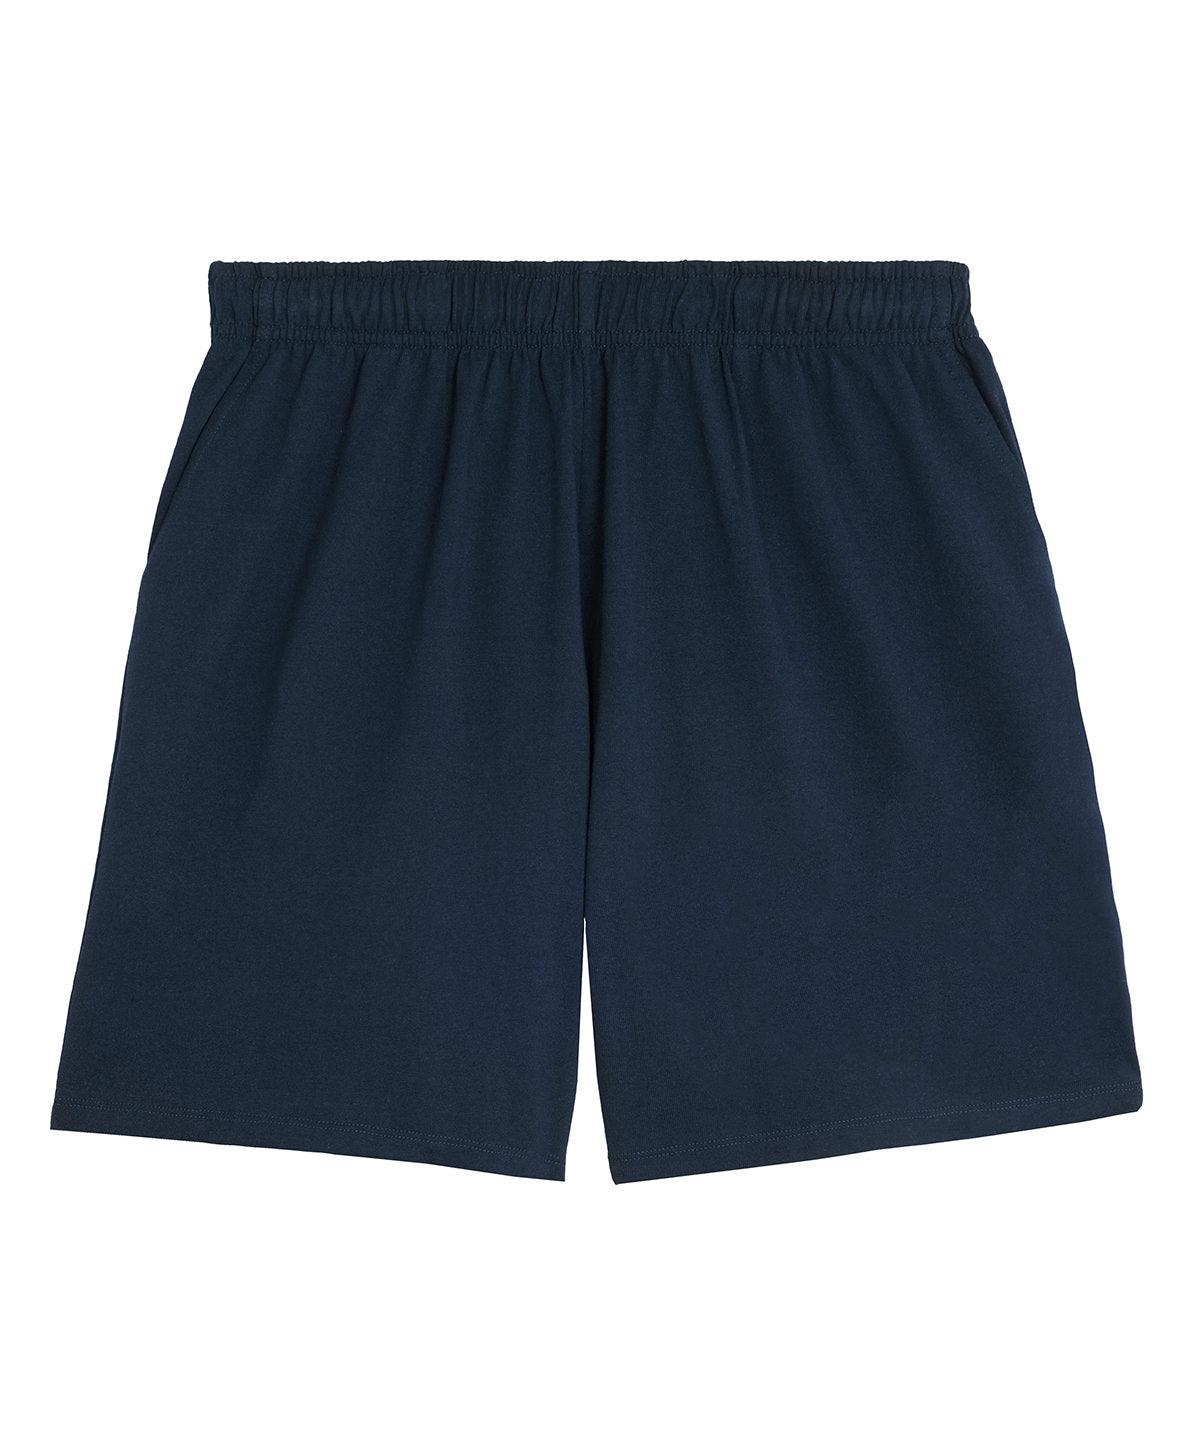 French Navy - Unisex Waker shorts (STBU070) Shorts Stanley/Stella New Styles for 2023, Organic & Conscious, Plus Sizes, Rebrandable, Trousers & Shorts Schoolwear Centres